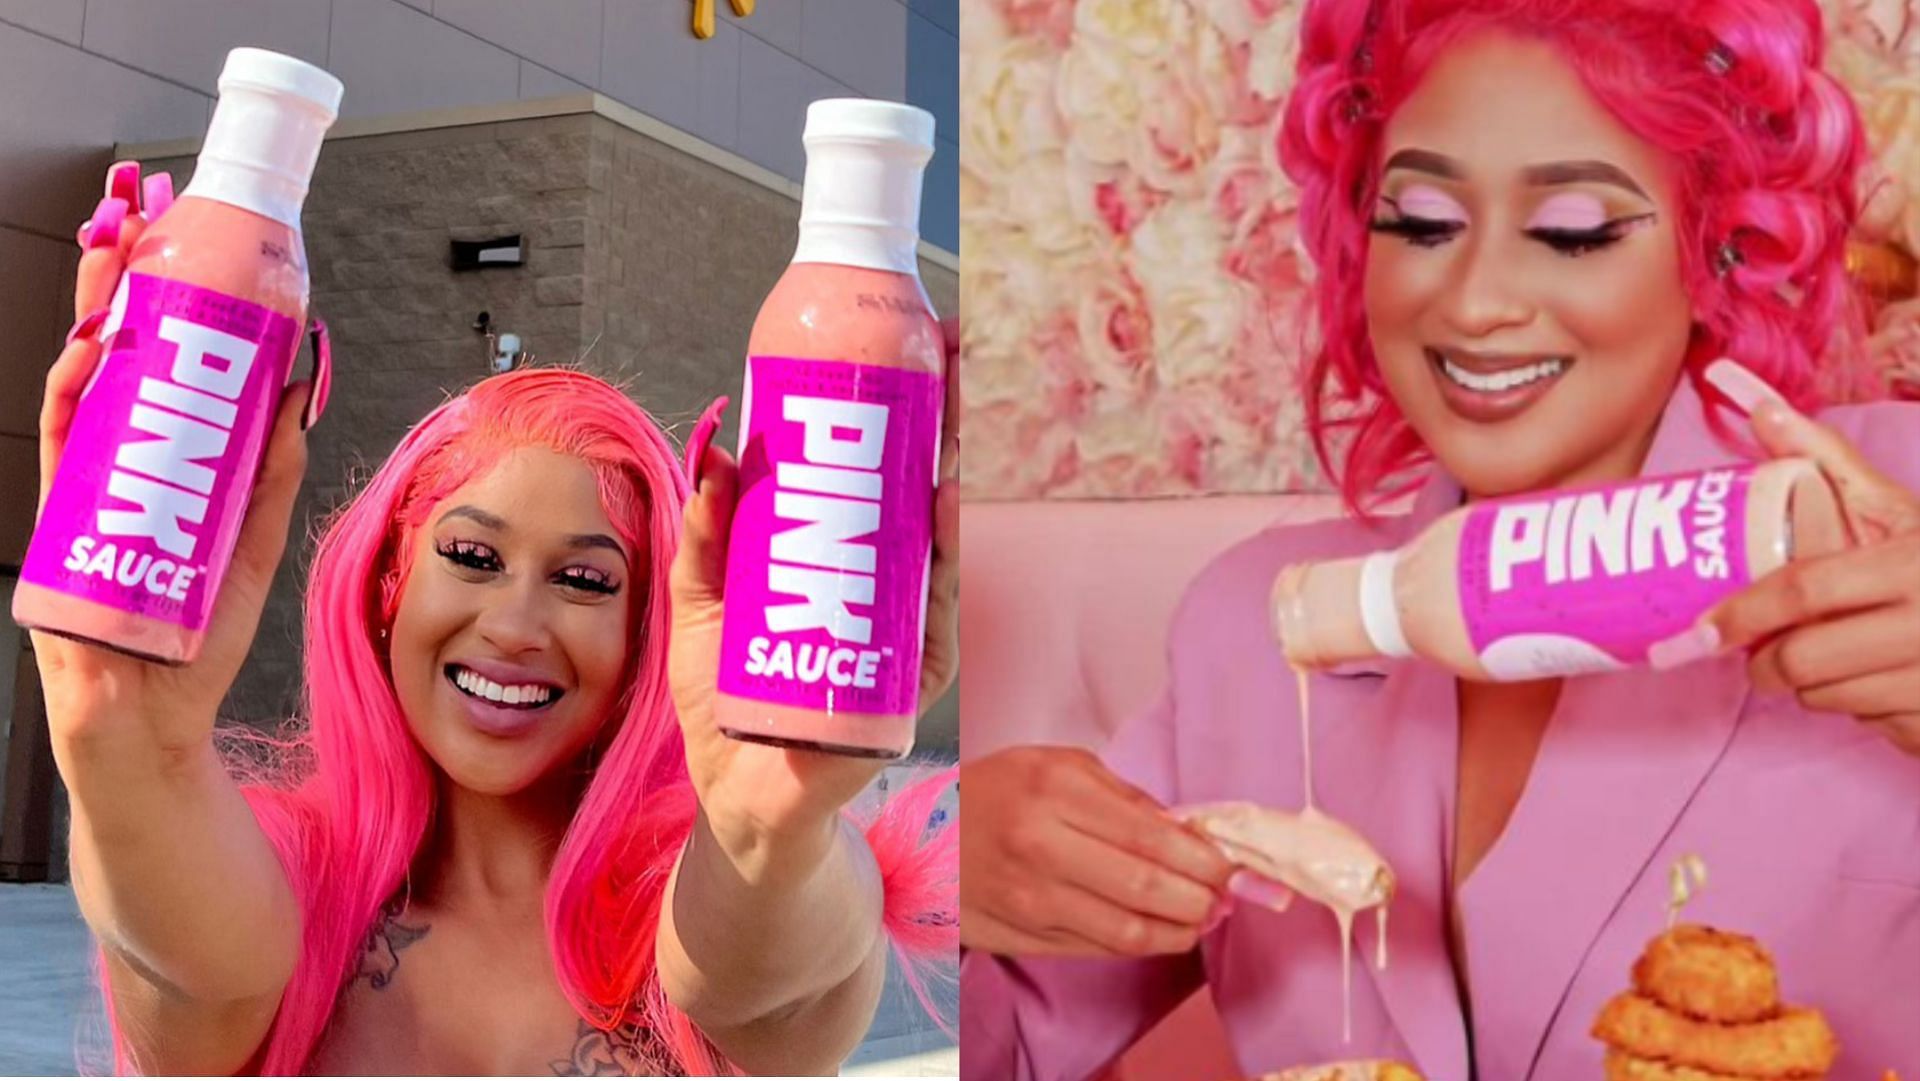 Viral Pink Sauce from June 2022 will now be sold at Walmart. Memes take over Twitter. (Image via Instagram/ chef.pii, Tiktok/chef.pii)